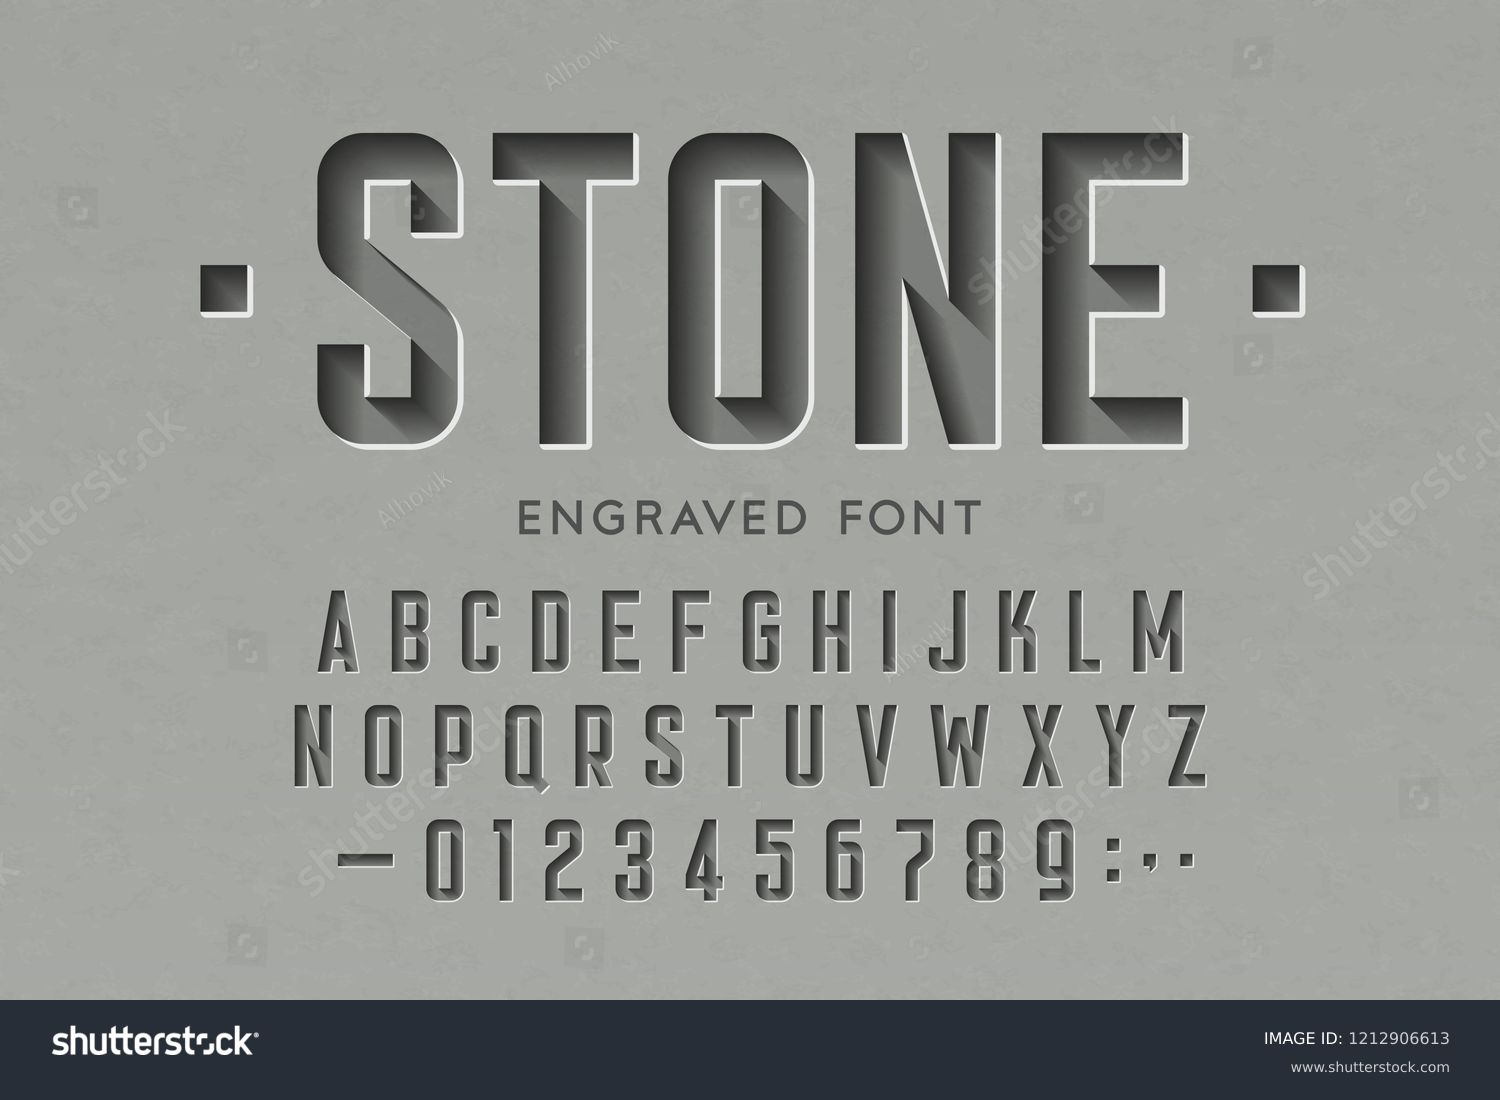 Engraved on stone font, alphabet letters and numbers vector illustration #1212906613